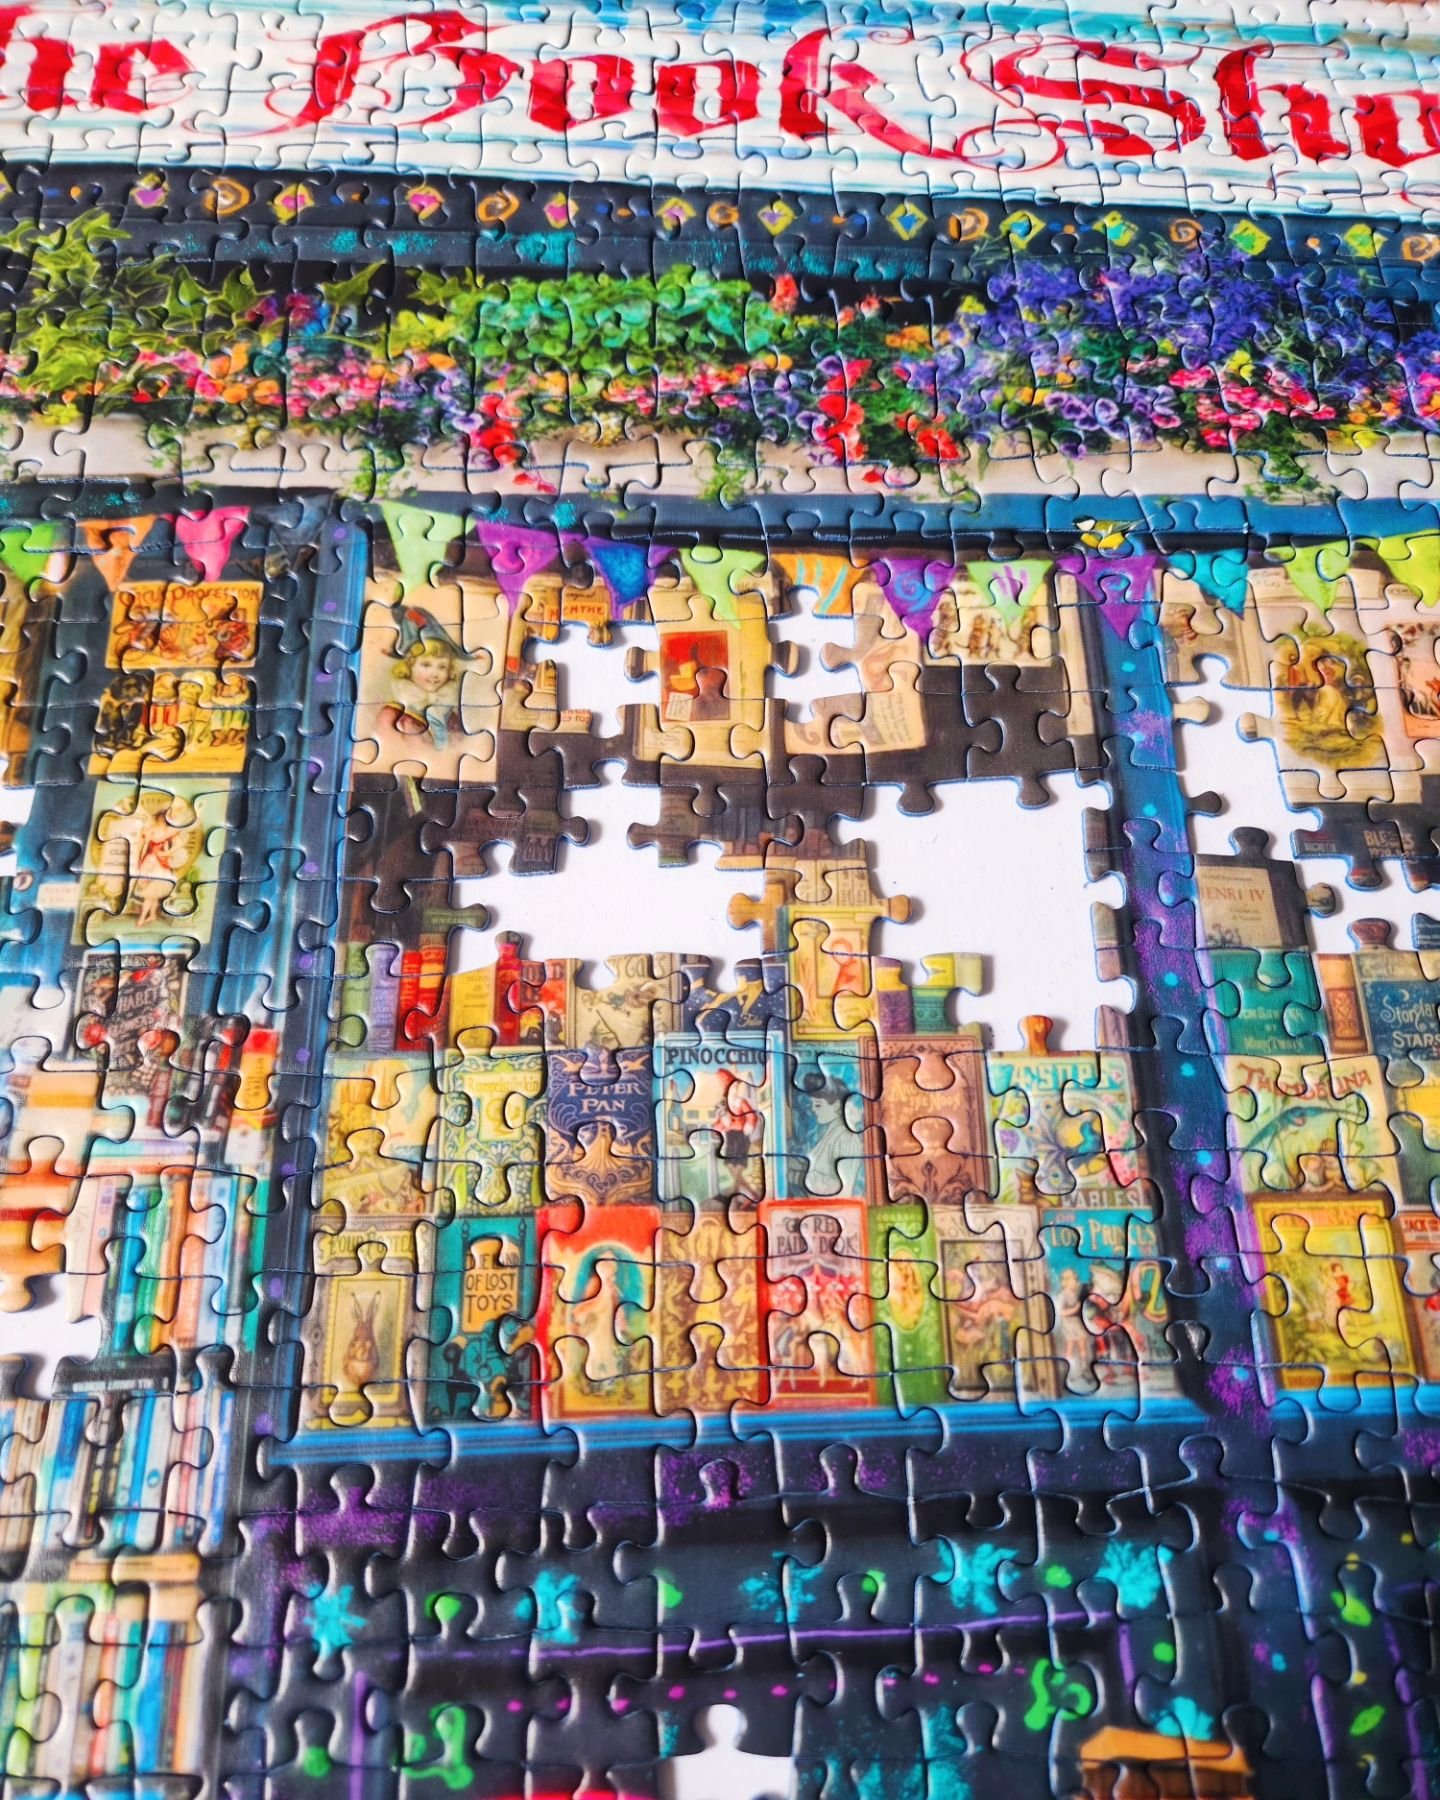 The Bookshop 📖🌷📚

This was a thrift score! I think this puzzle costed around $3.50-$5, but it's always a risk if puzzles aren't complete. One thrift store that I went to had puzzle boxed opening up all over the place and pieces falling out&mdash;n